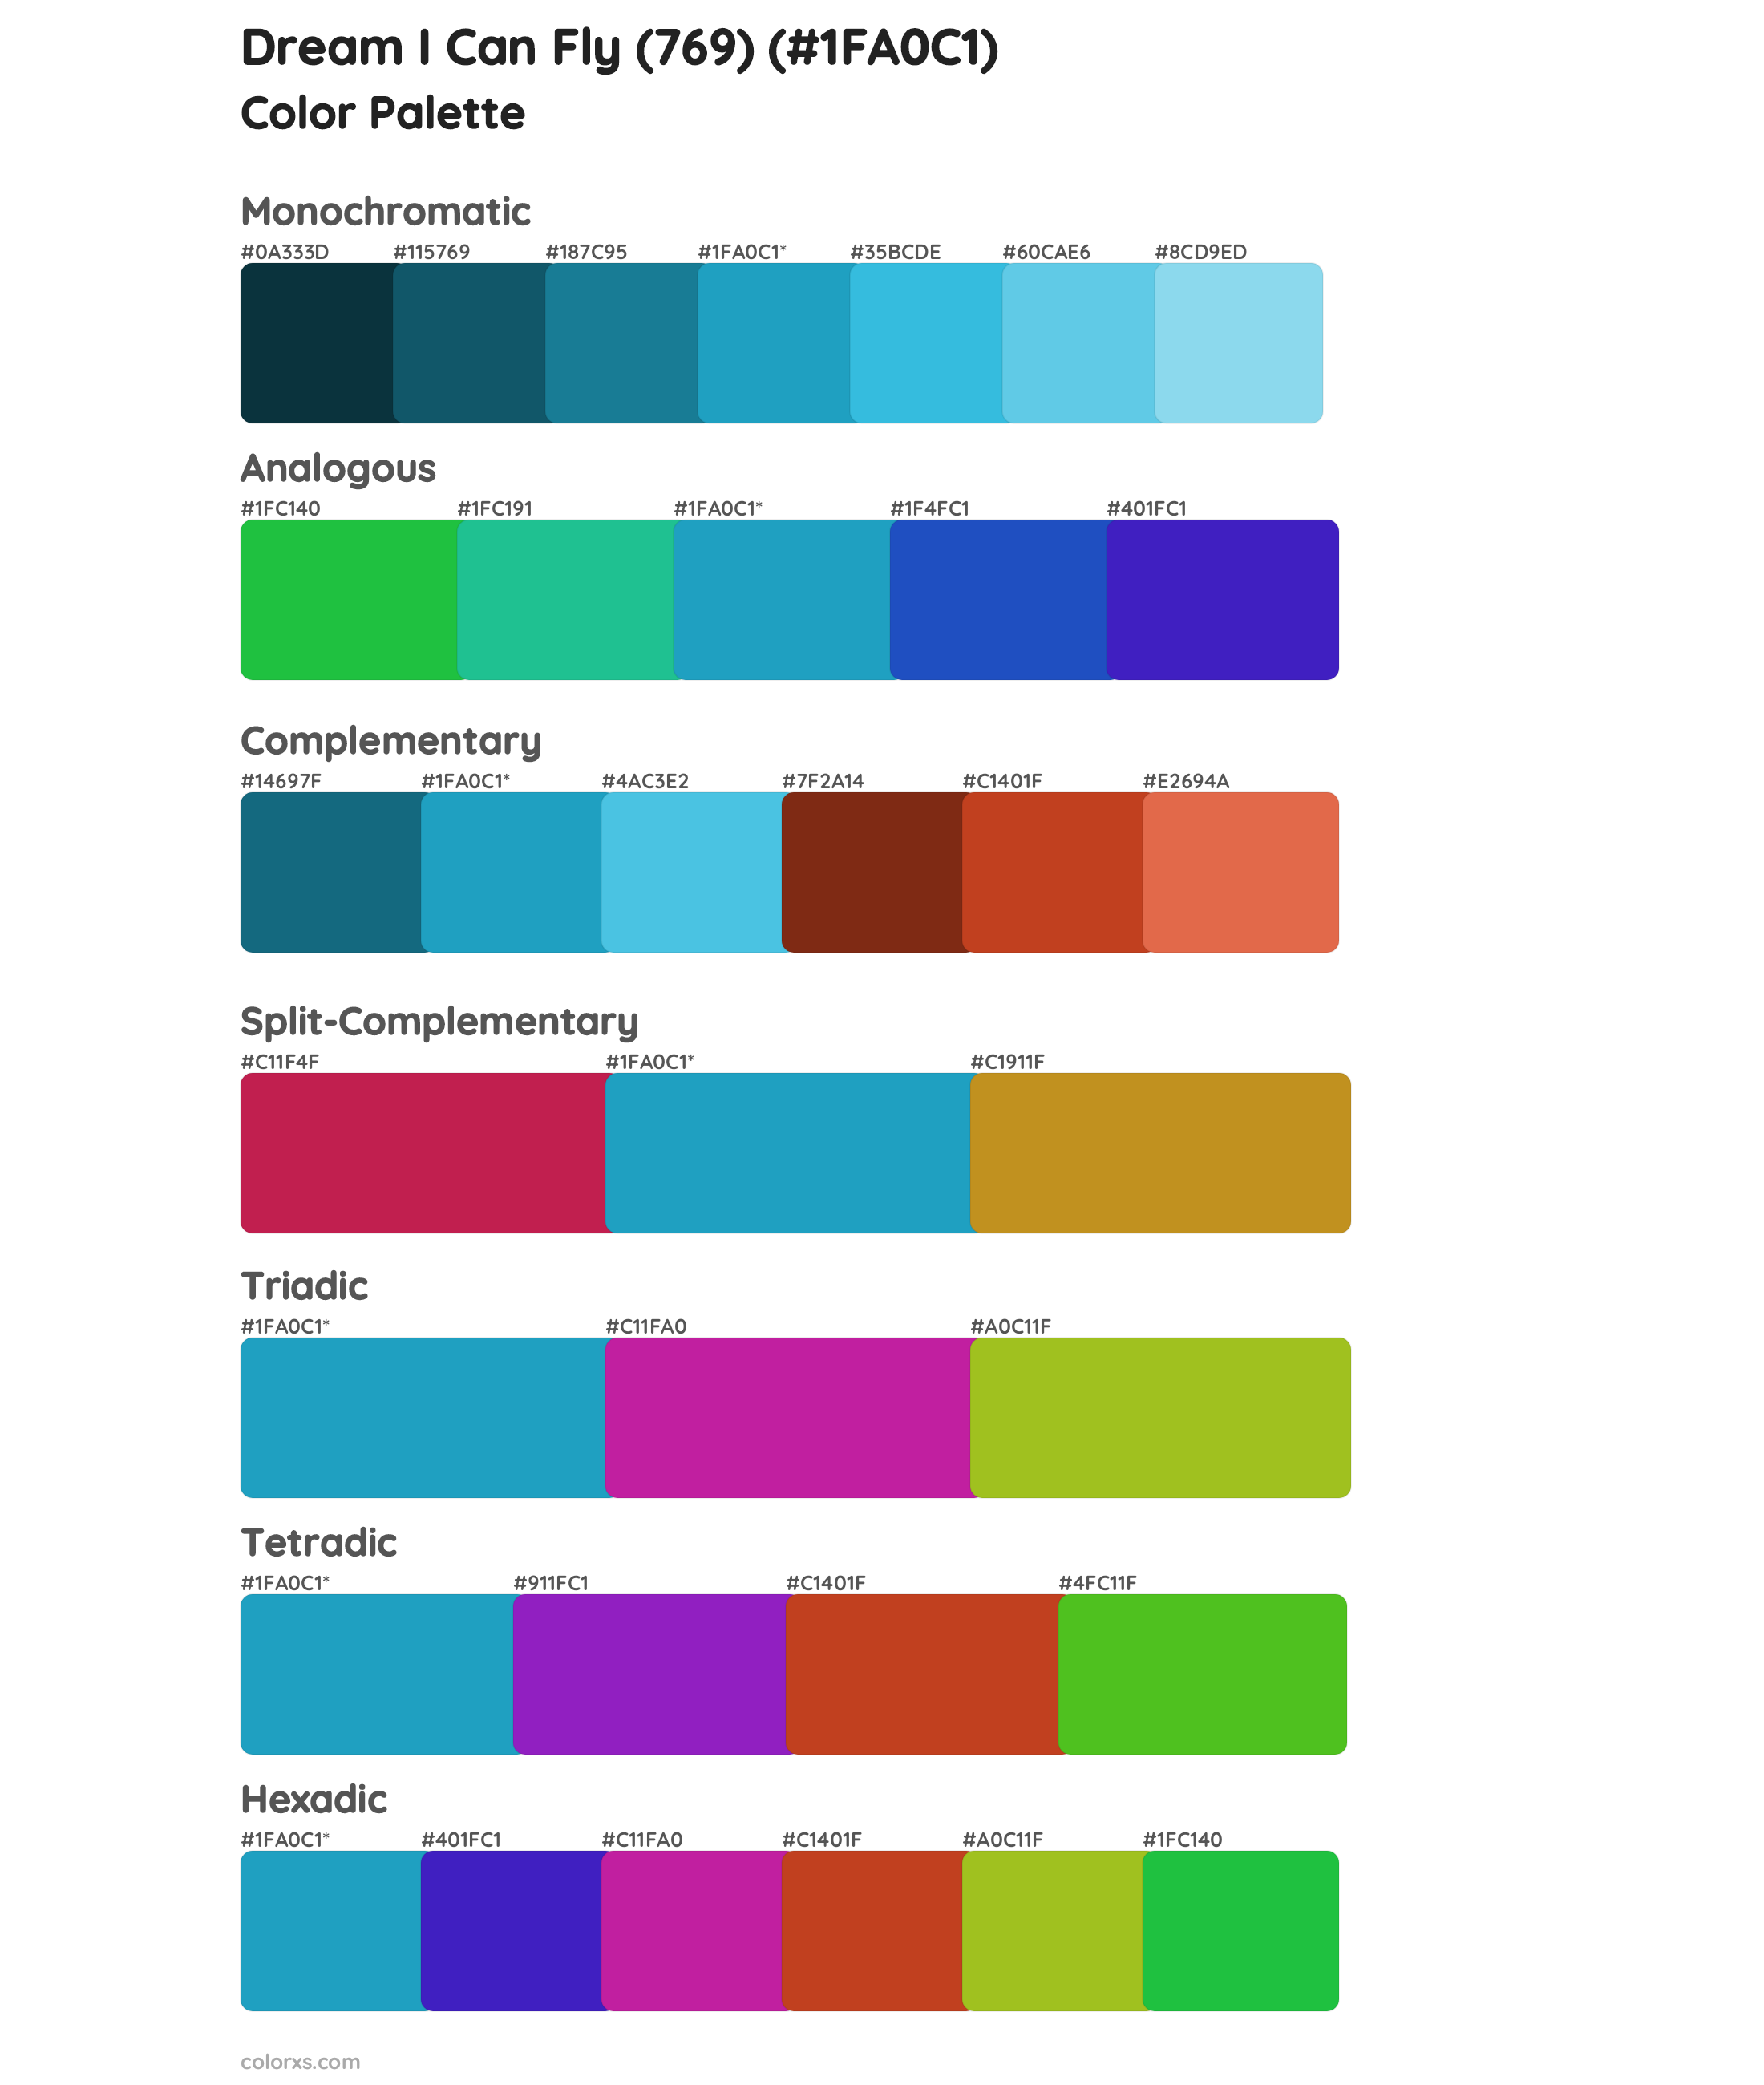 Dream I Can Fly (769) Color Scheme Palettes